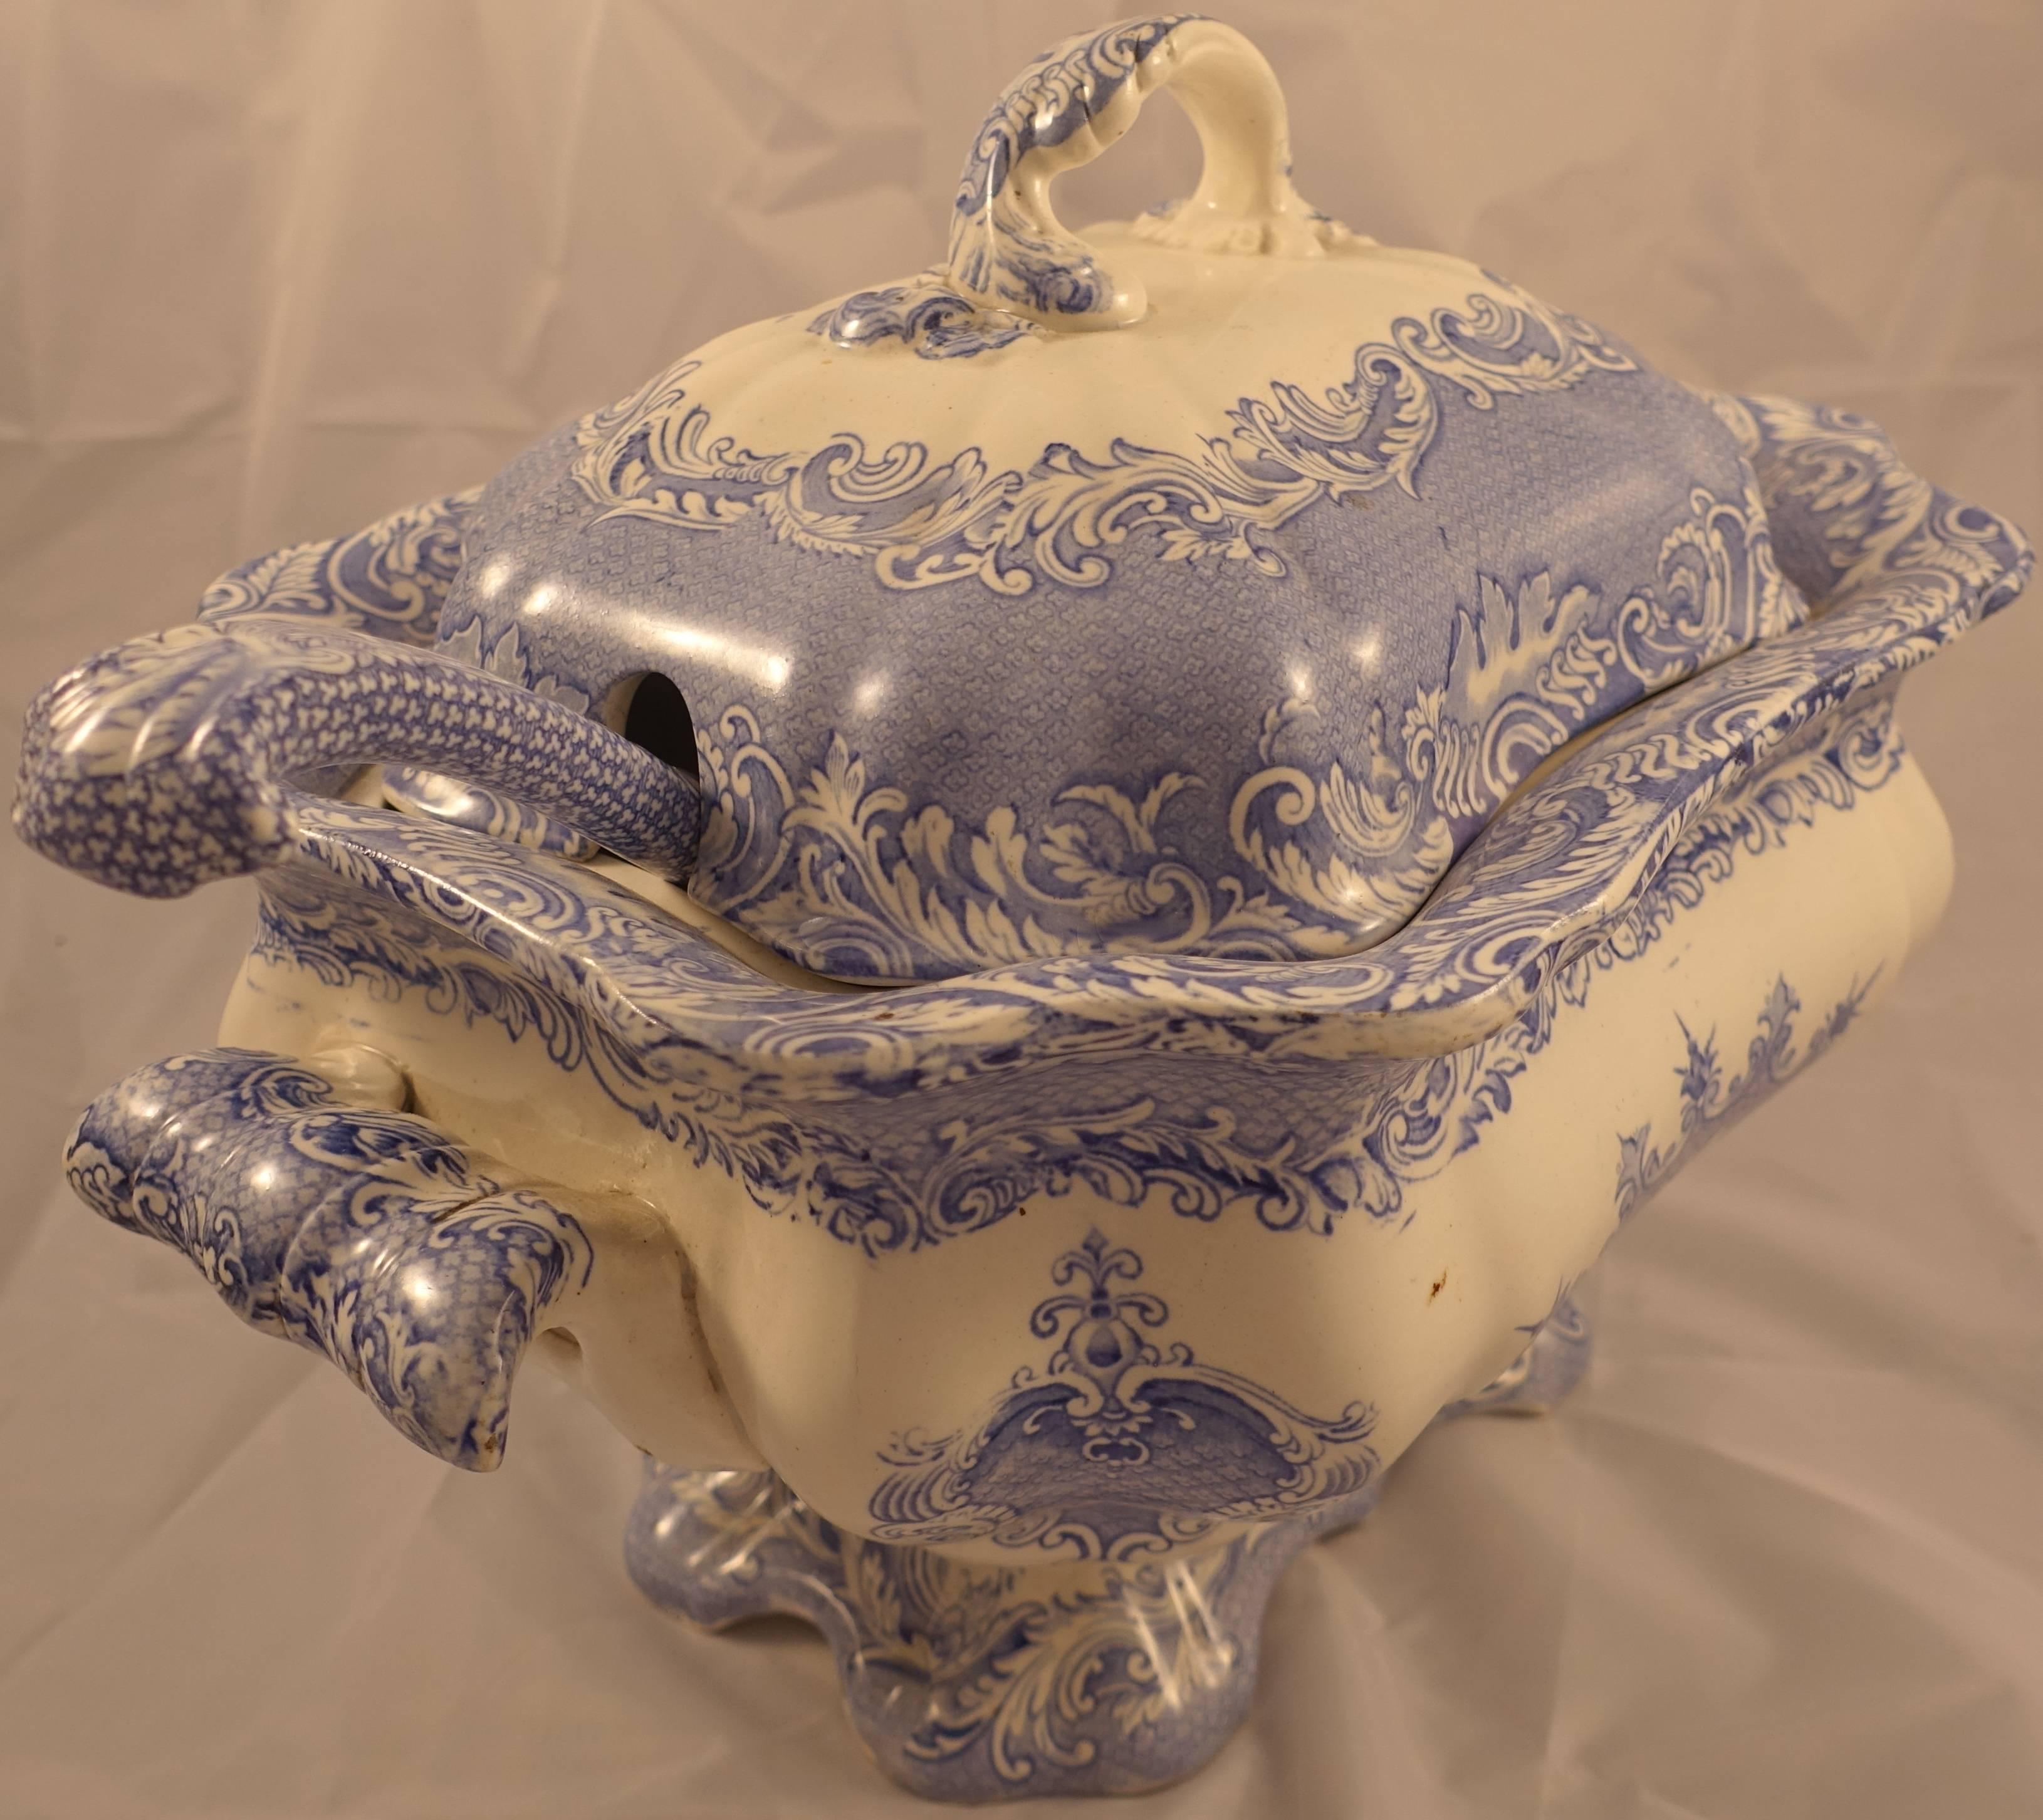 Soup tureen with matching ladle and removable lid. Looks more yellow in the photos than it really is. Color is more white than yellow. 

We have a good selection of blue & white pottery. Please inquire if interested.